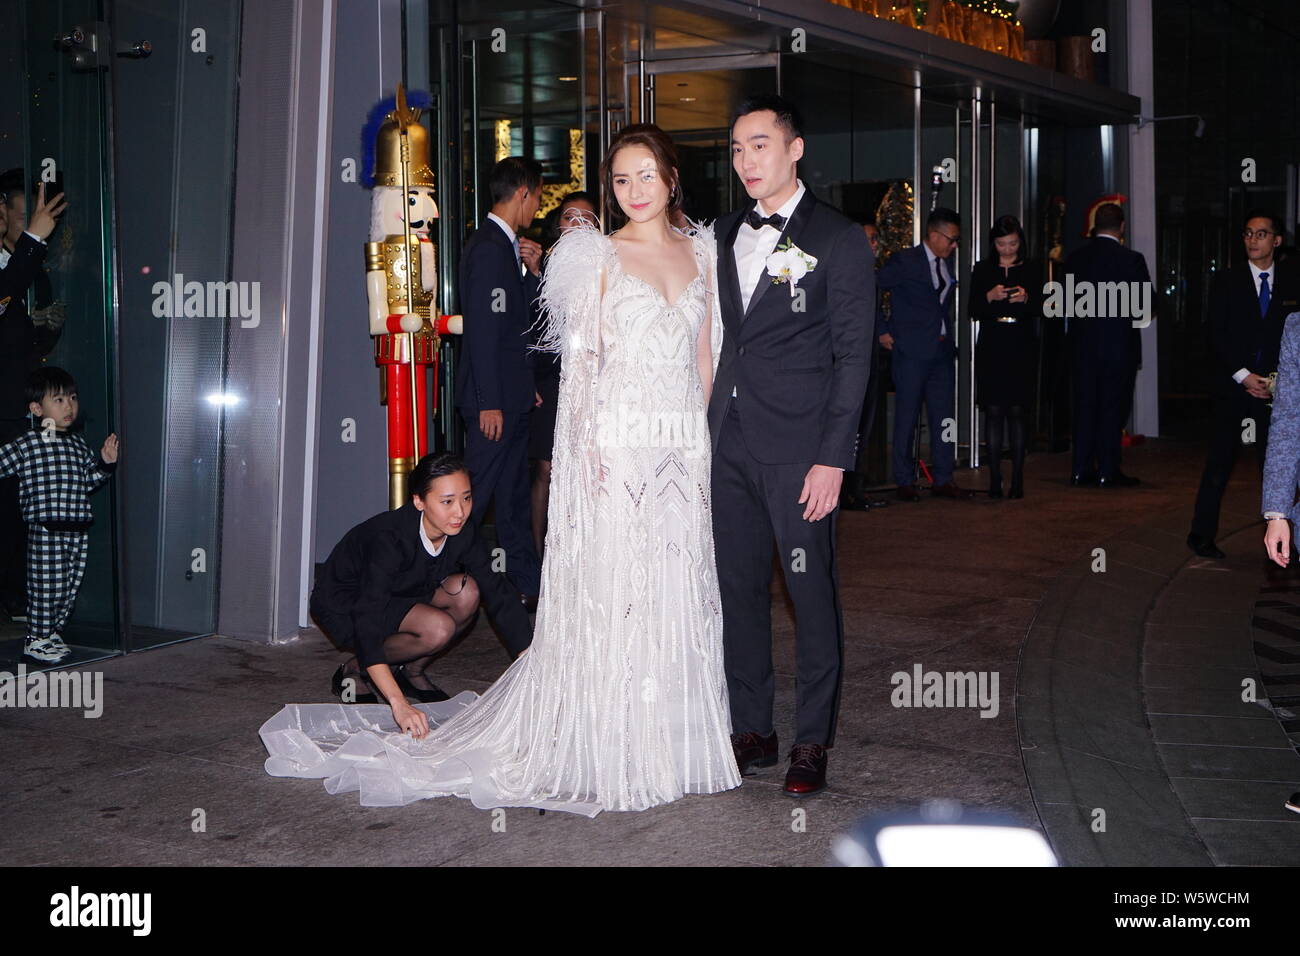 Hong Kong singer and actress Gillian Chung of pop duo Twins and her husband Michael Lai pose for a photo before their wedding ceremony in Hong Kong, C Stock Photo